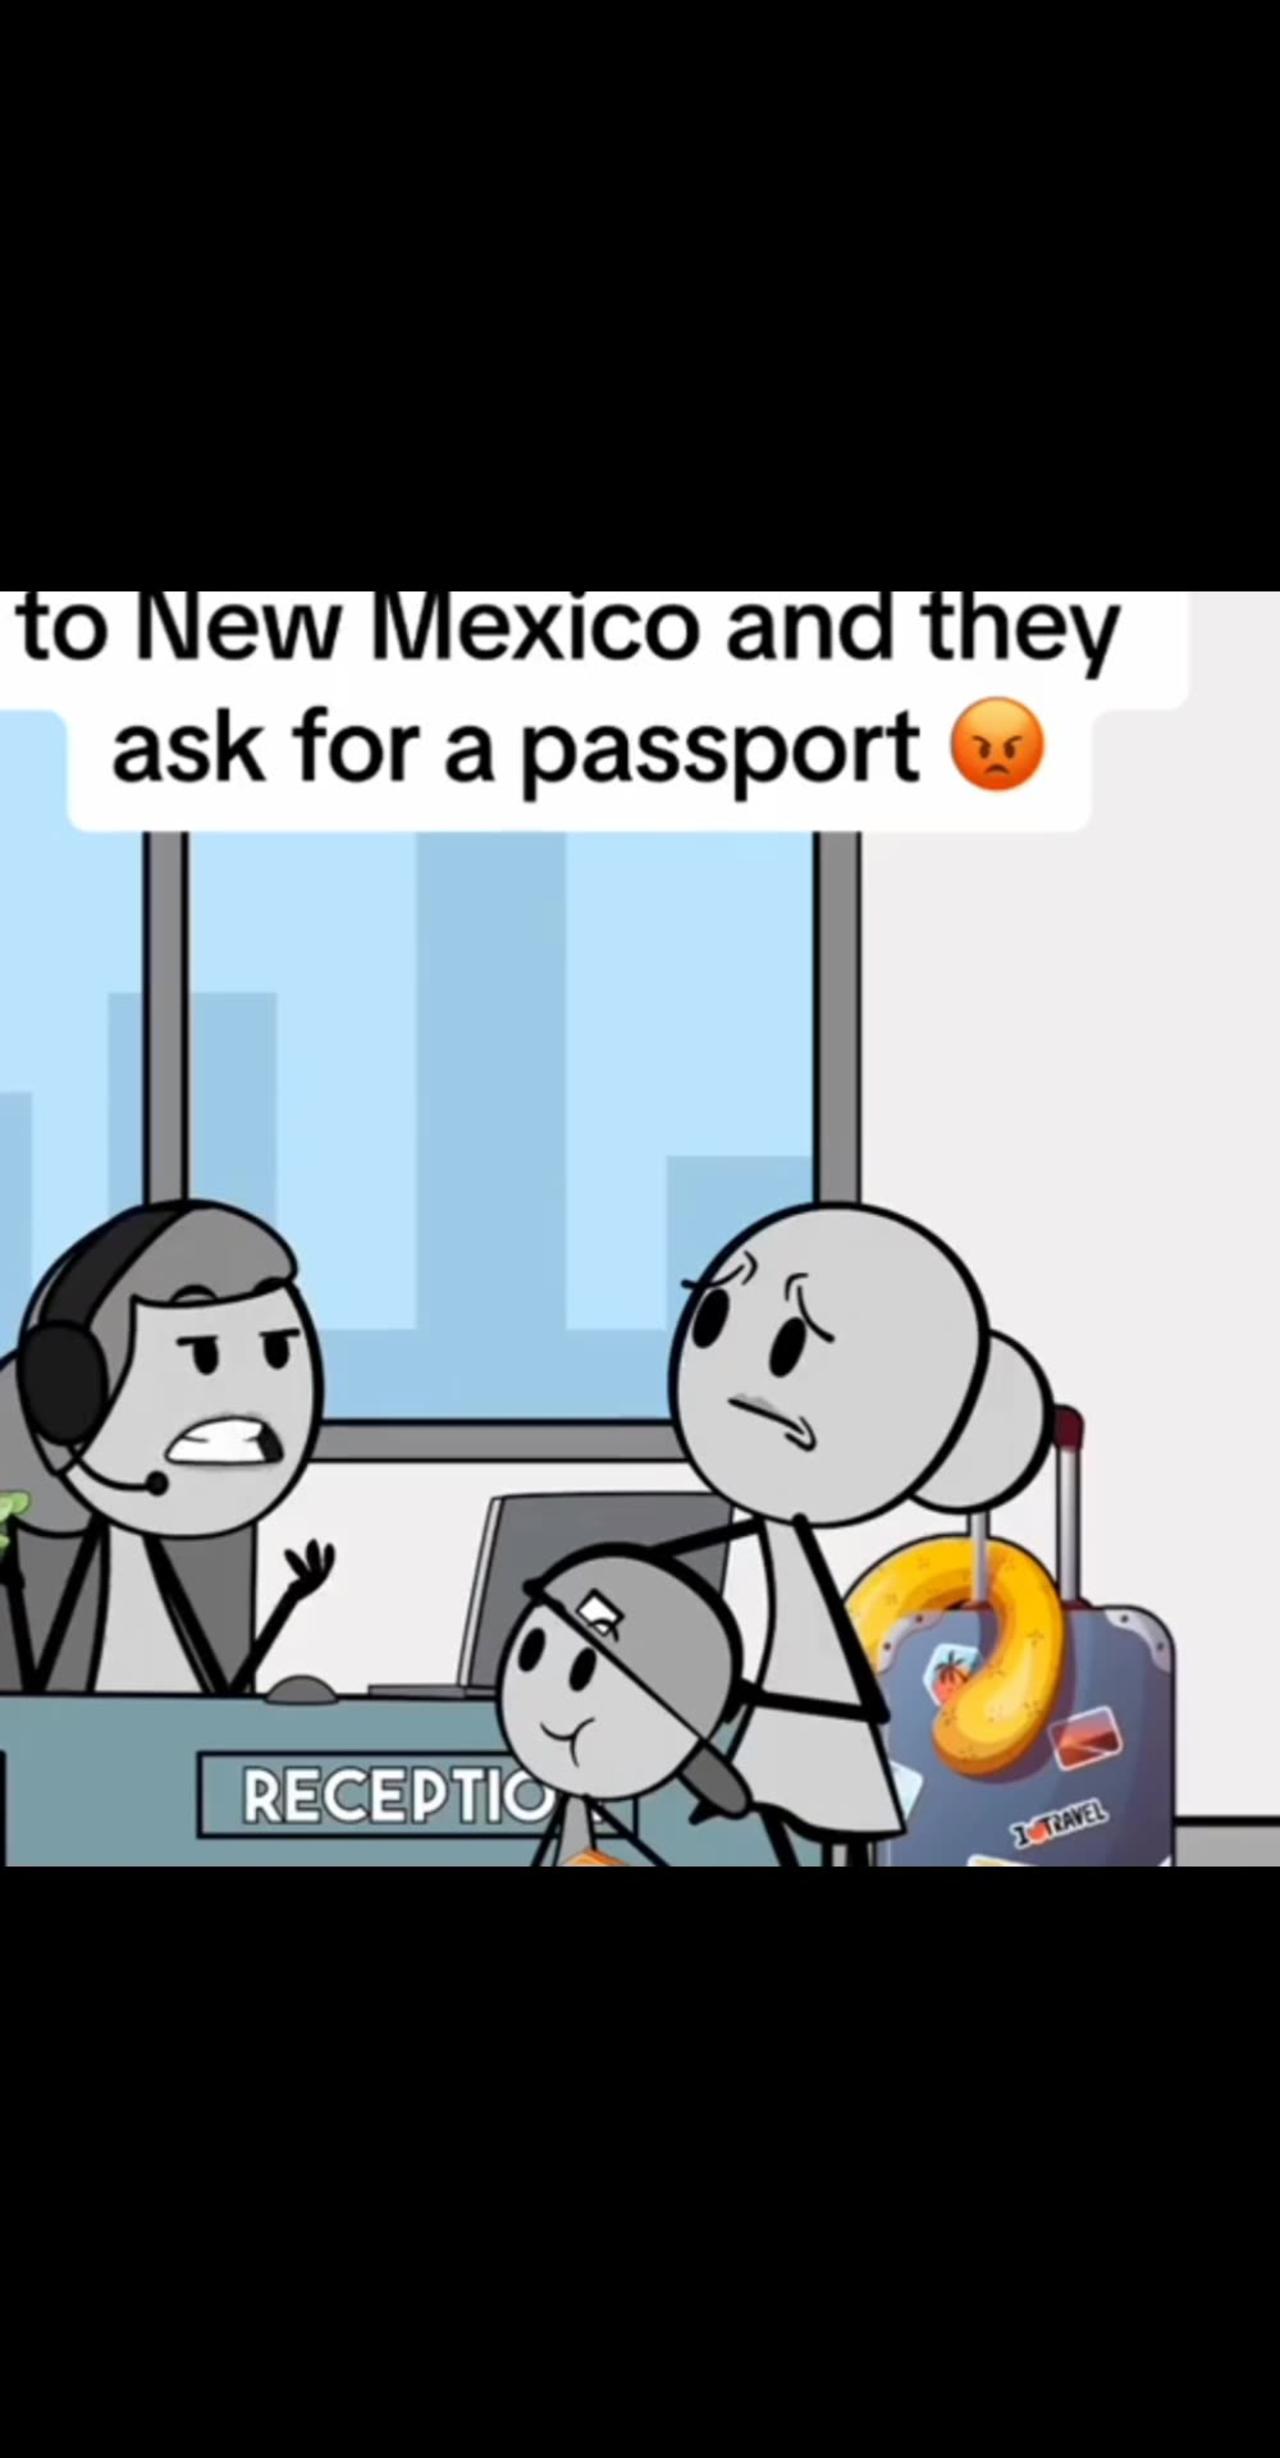 New mexico and they ask for passport